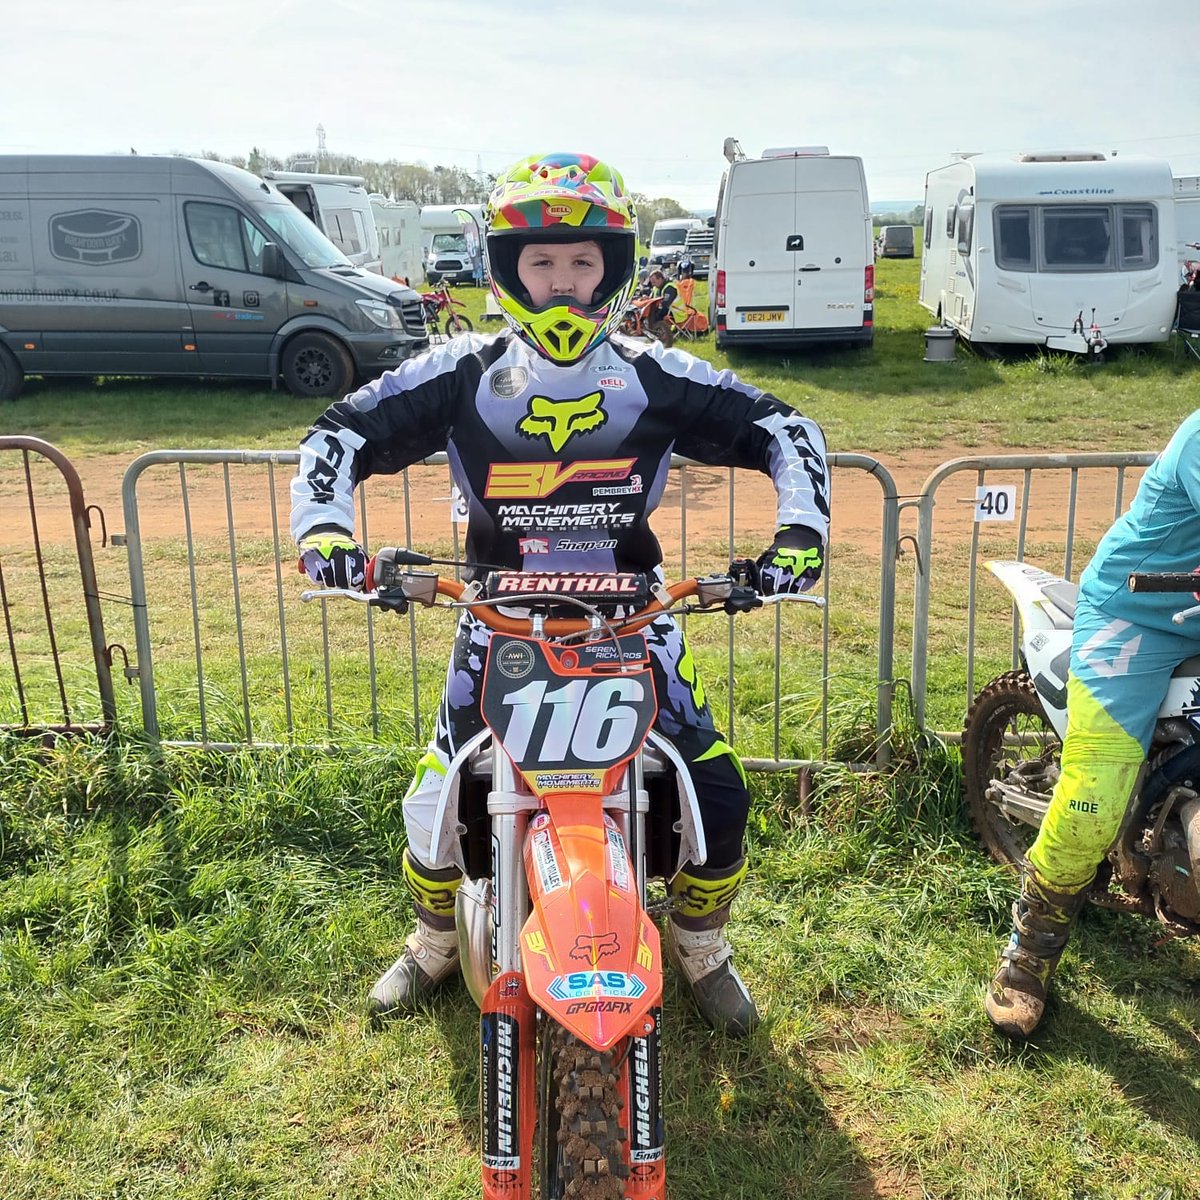 Year 7 pupil Seren is competing in the 2nd round of a Motocross Championship meeting with their team this weekend after smashing round 1…Good luck Seren, we are all very proud of you!